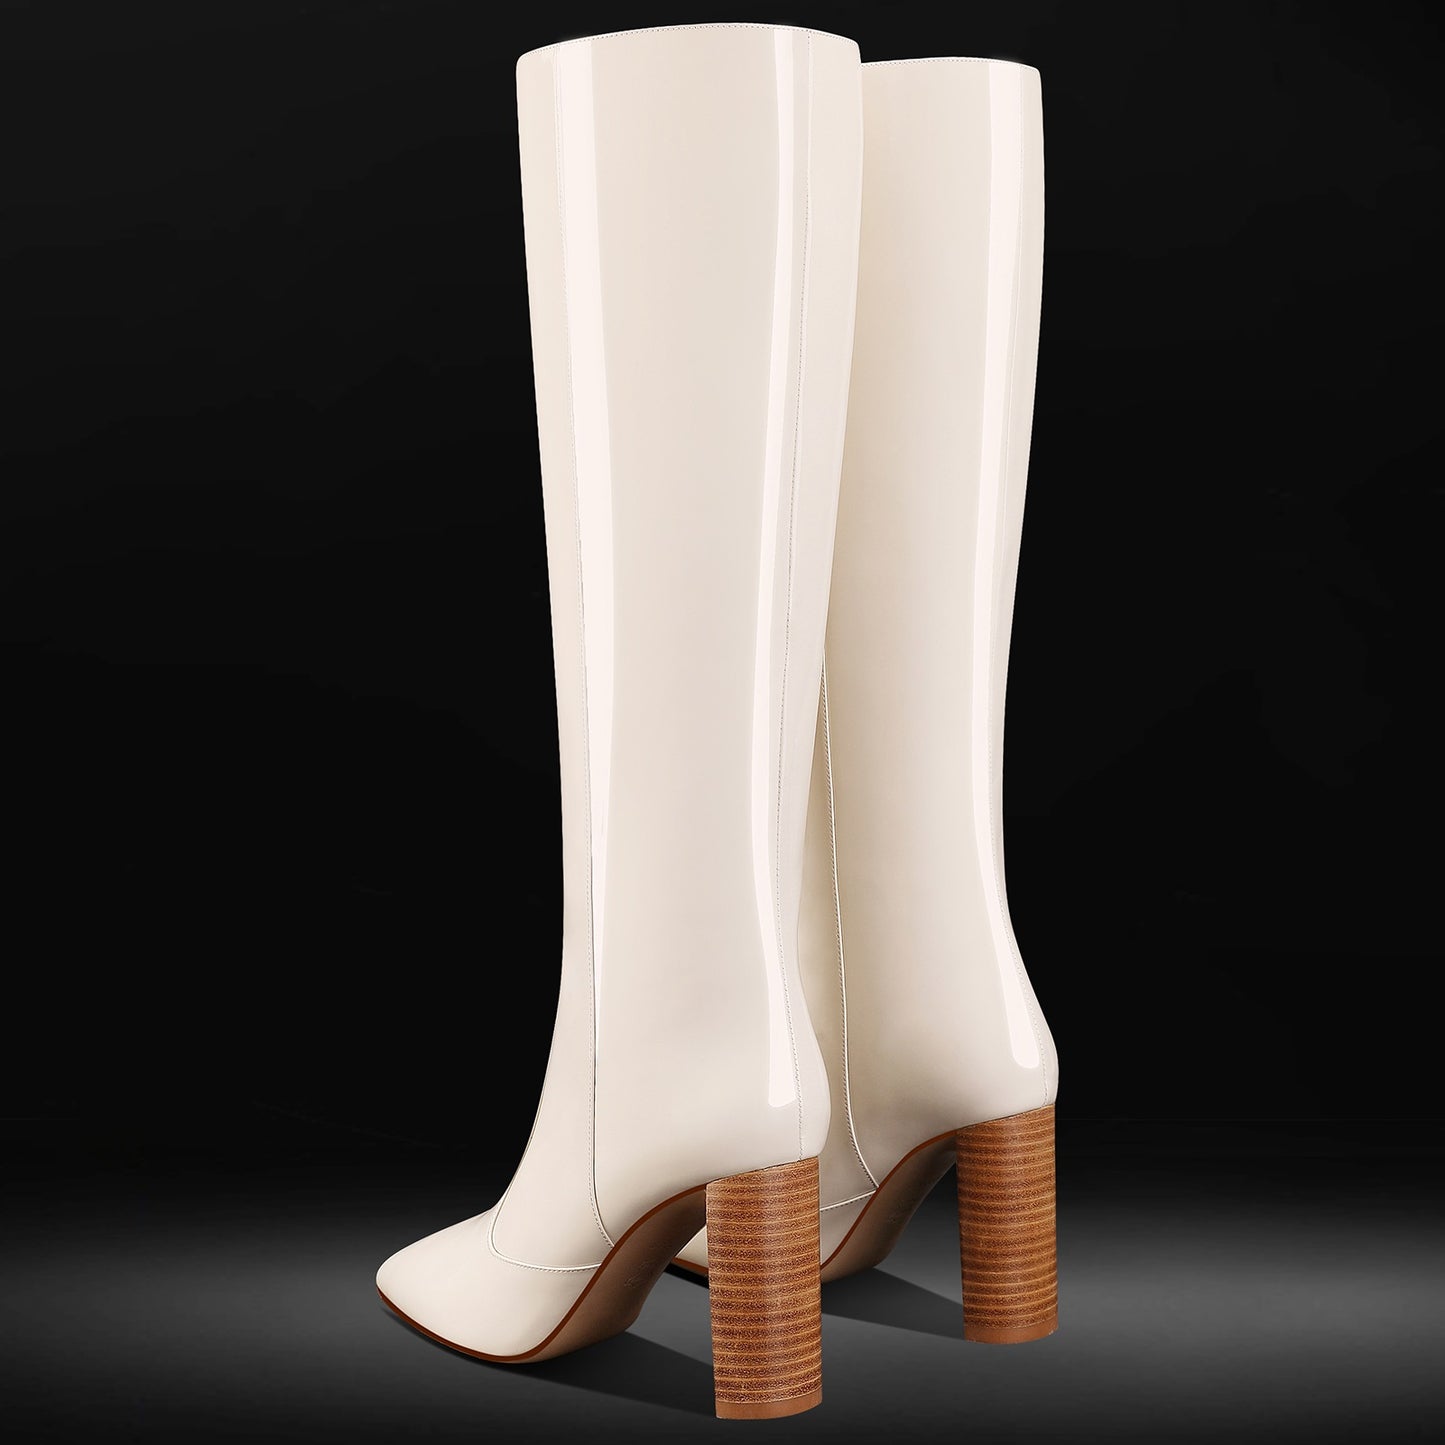 Chunky High Heel Knee Boots,Patent Leather Long Boots Pointed Toe